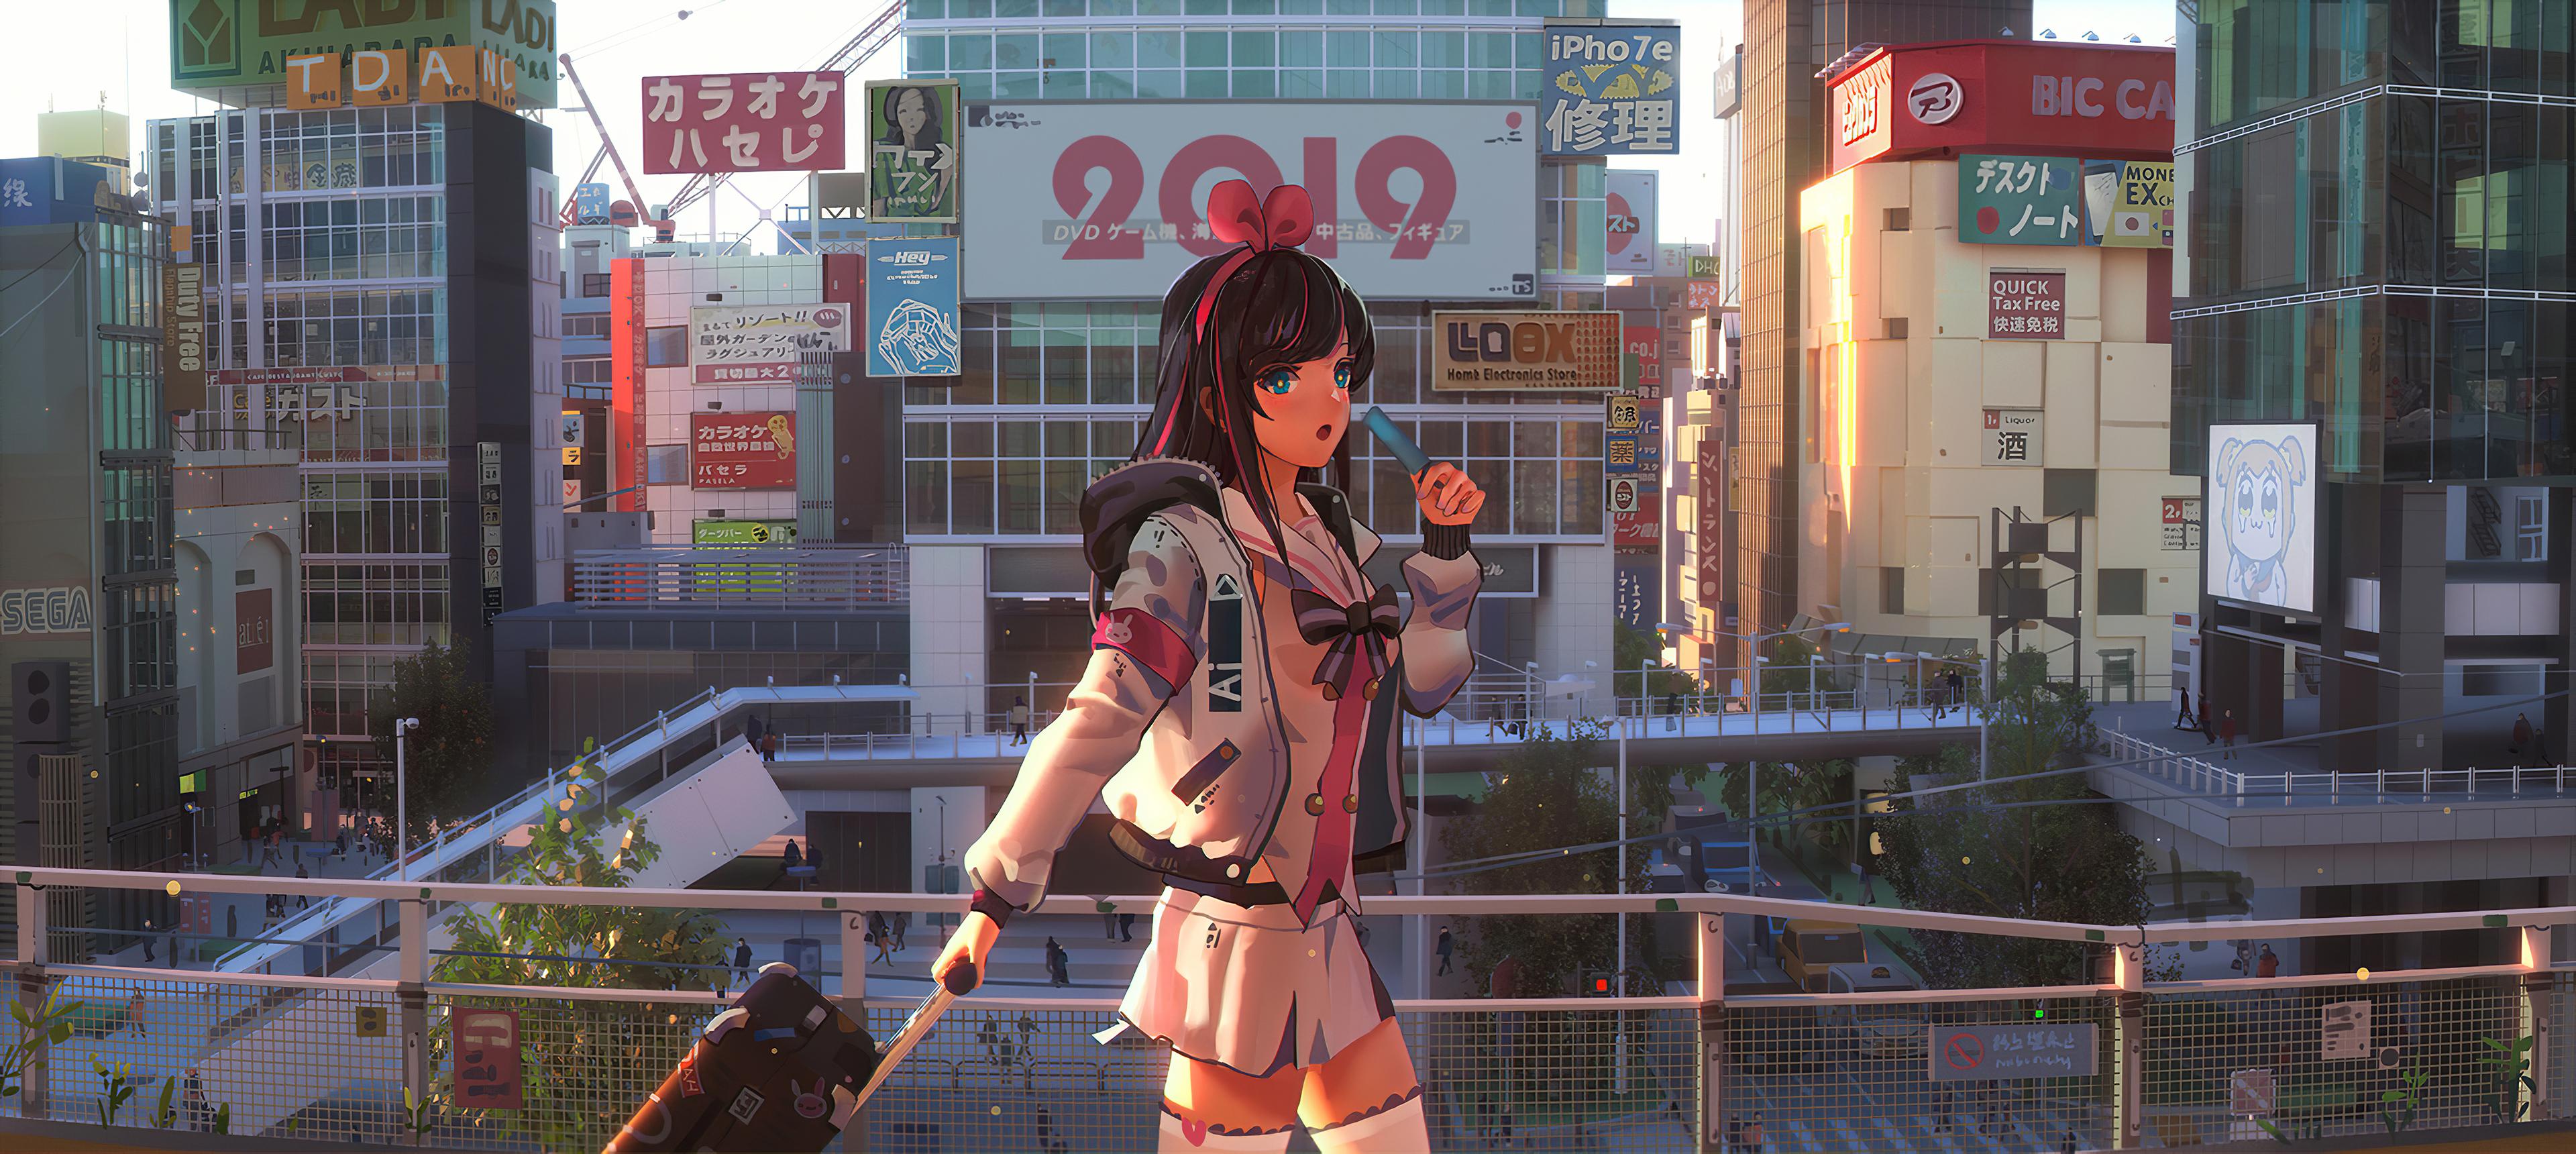 3840 x 1720 · jpeg - Anime Girl Moving Out 4k, HD Anime, 4k Wallpapers, Images, Backgrounds ...